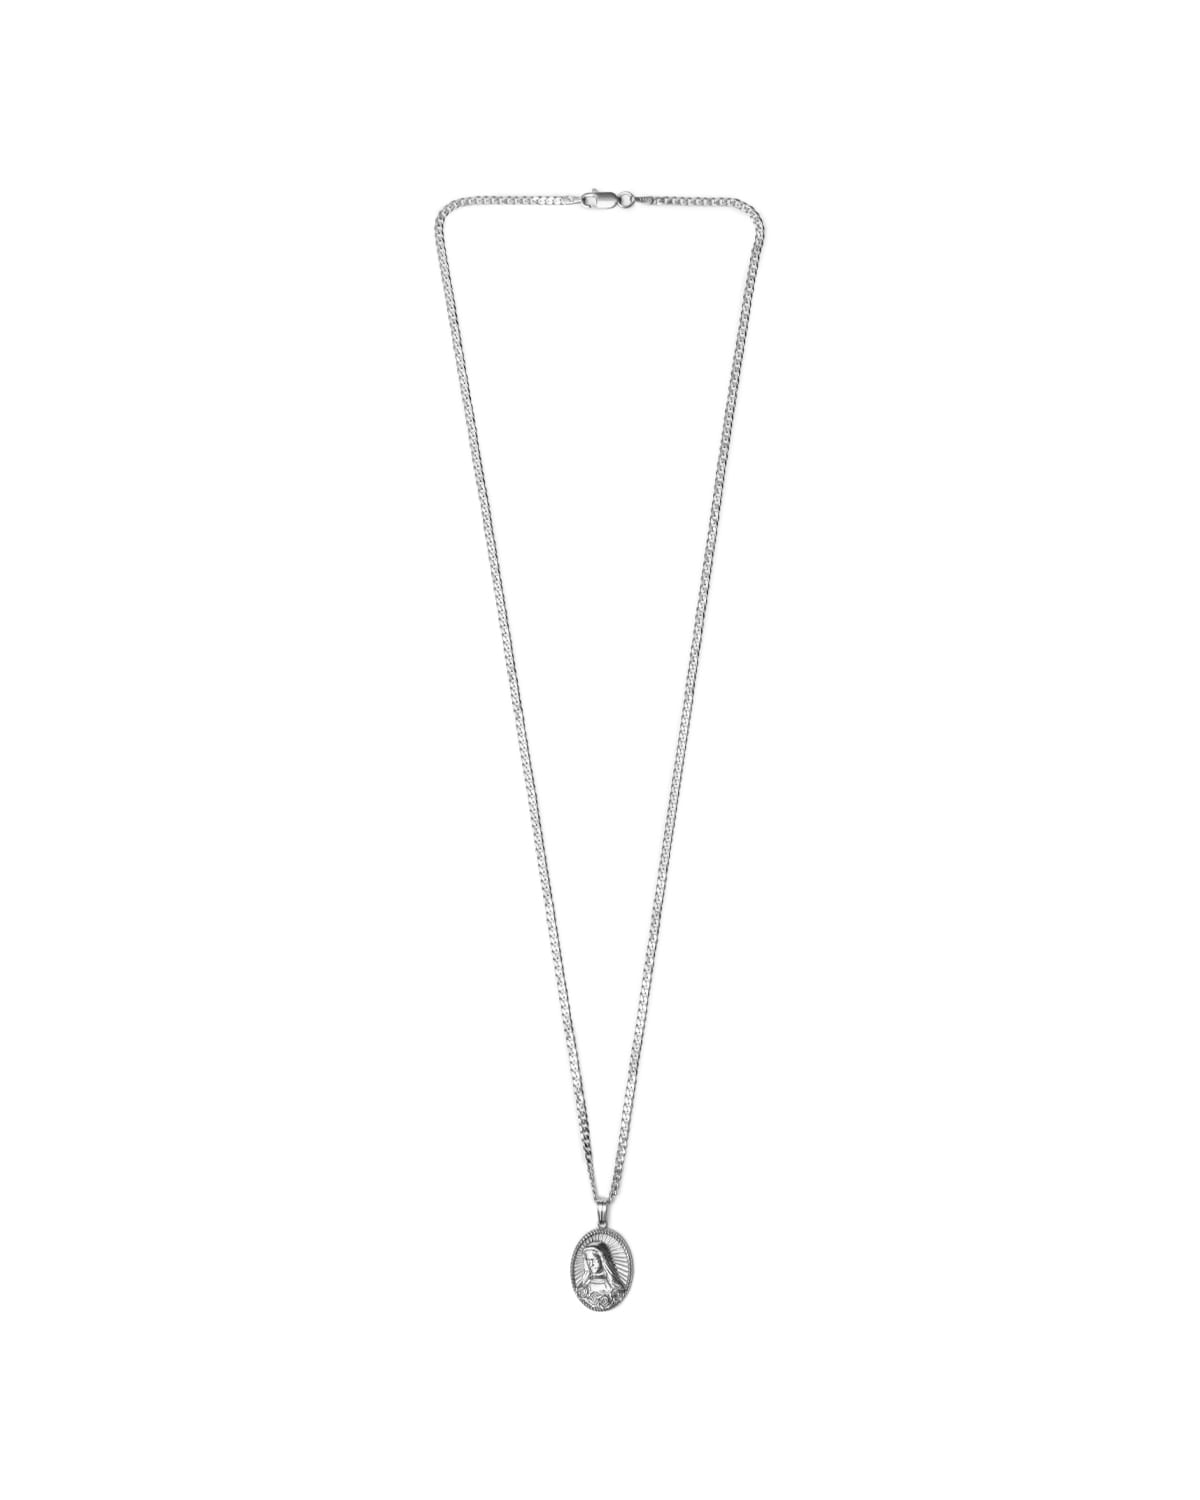 Queen of Peace Necklace